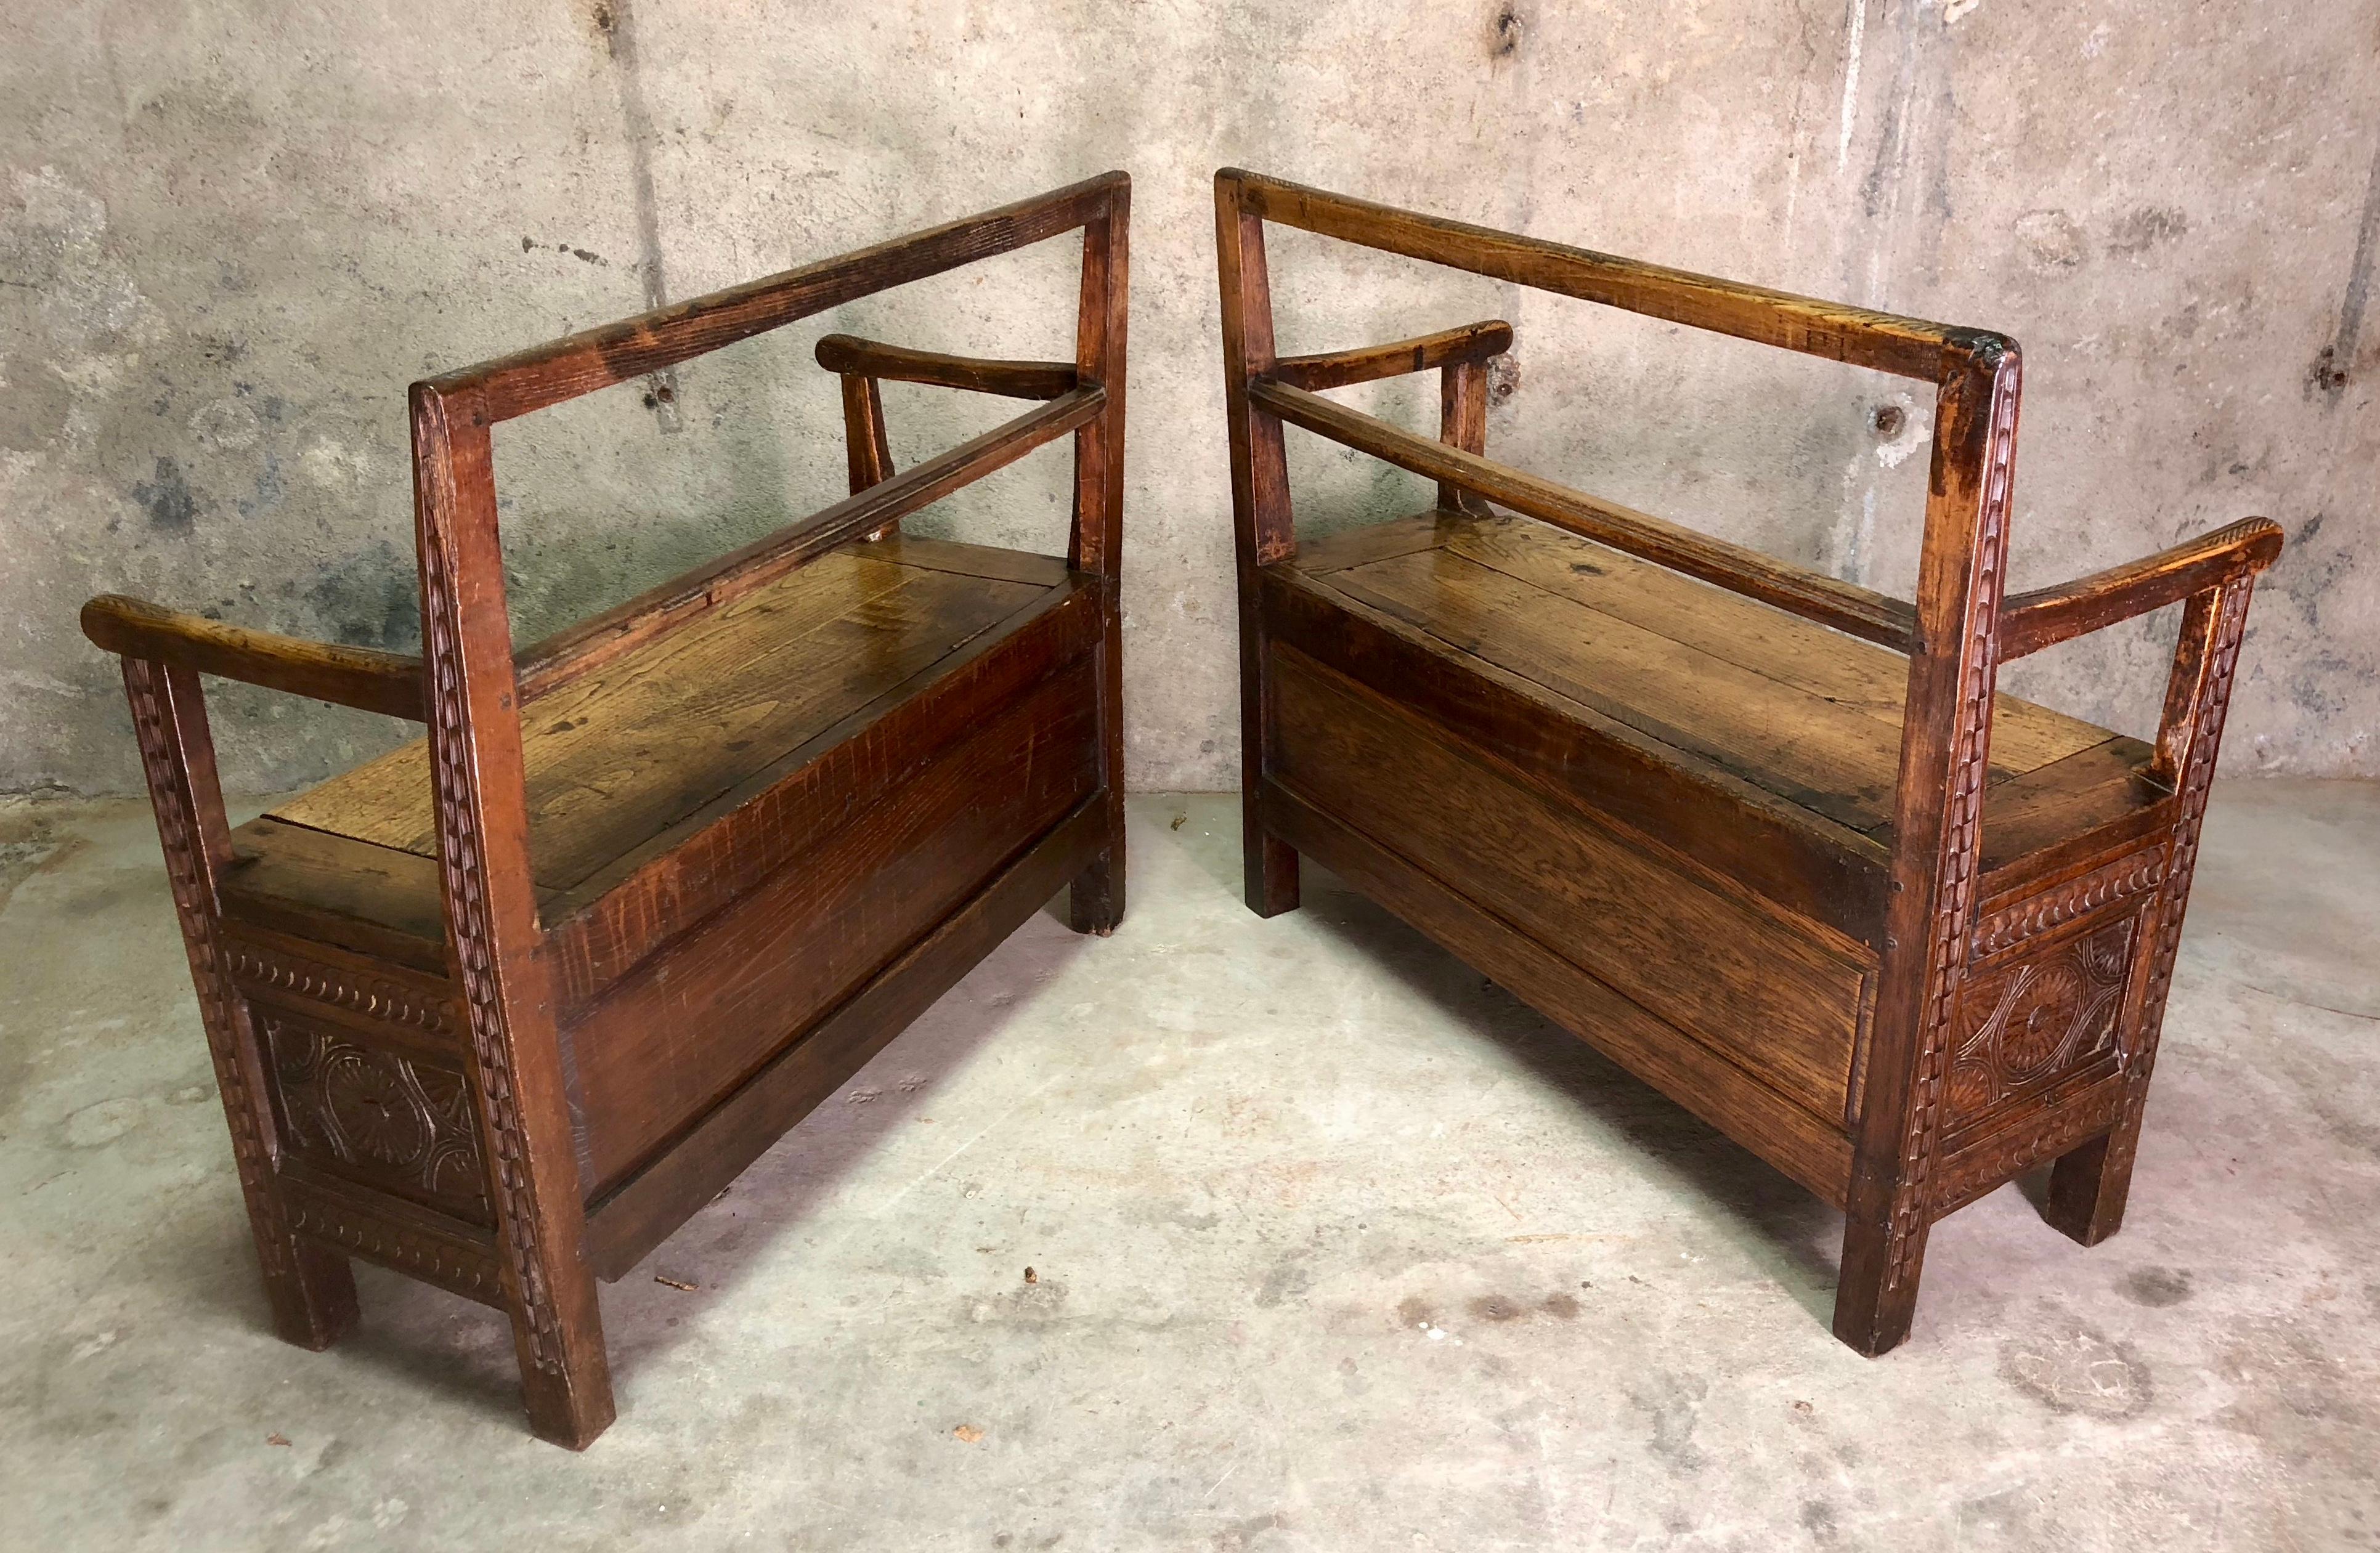 Hand-Carved Pair of French Breton Wooden Bench Chests, circa 19th Century